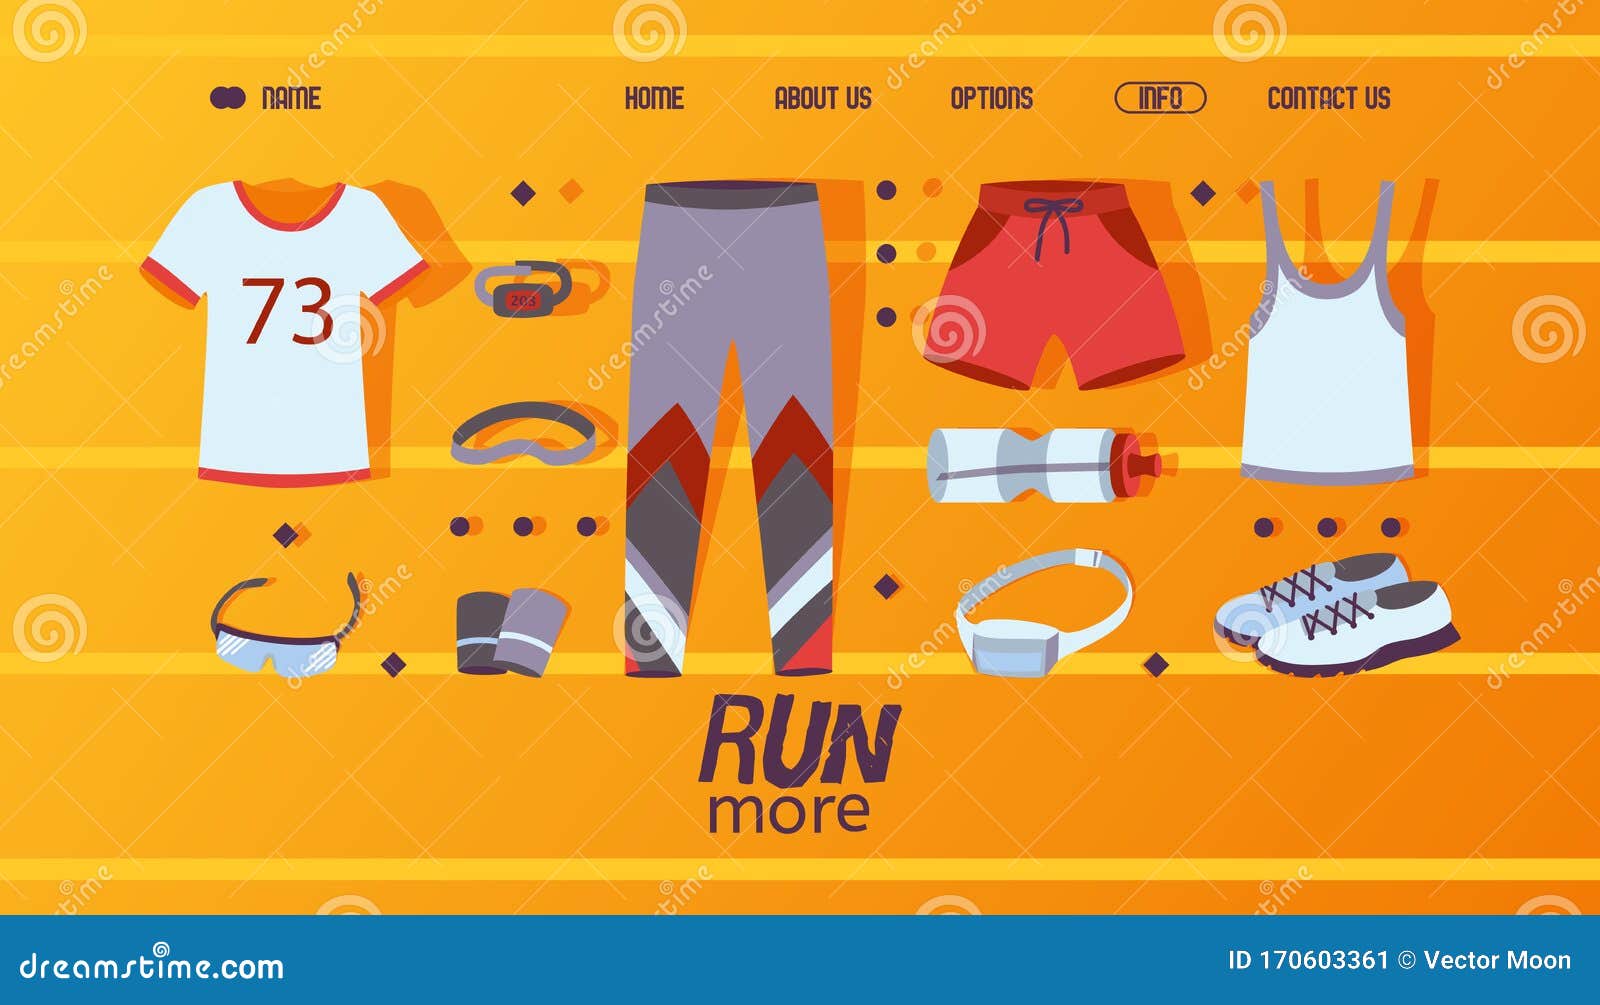 Fitness Clothes Shop Website Design, Vector Illustration. Landing Page  Template, Outfit and Accessories for Sport Stock Vector - Illustration of  marathon, fashion: 170603361